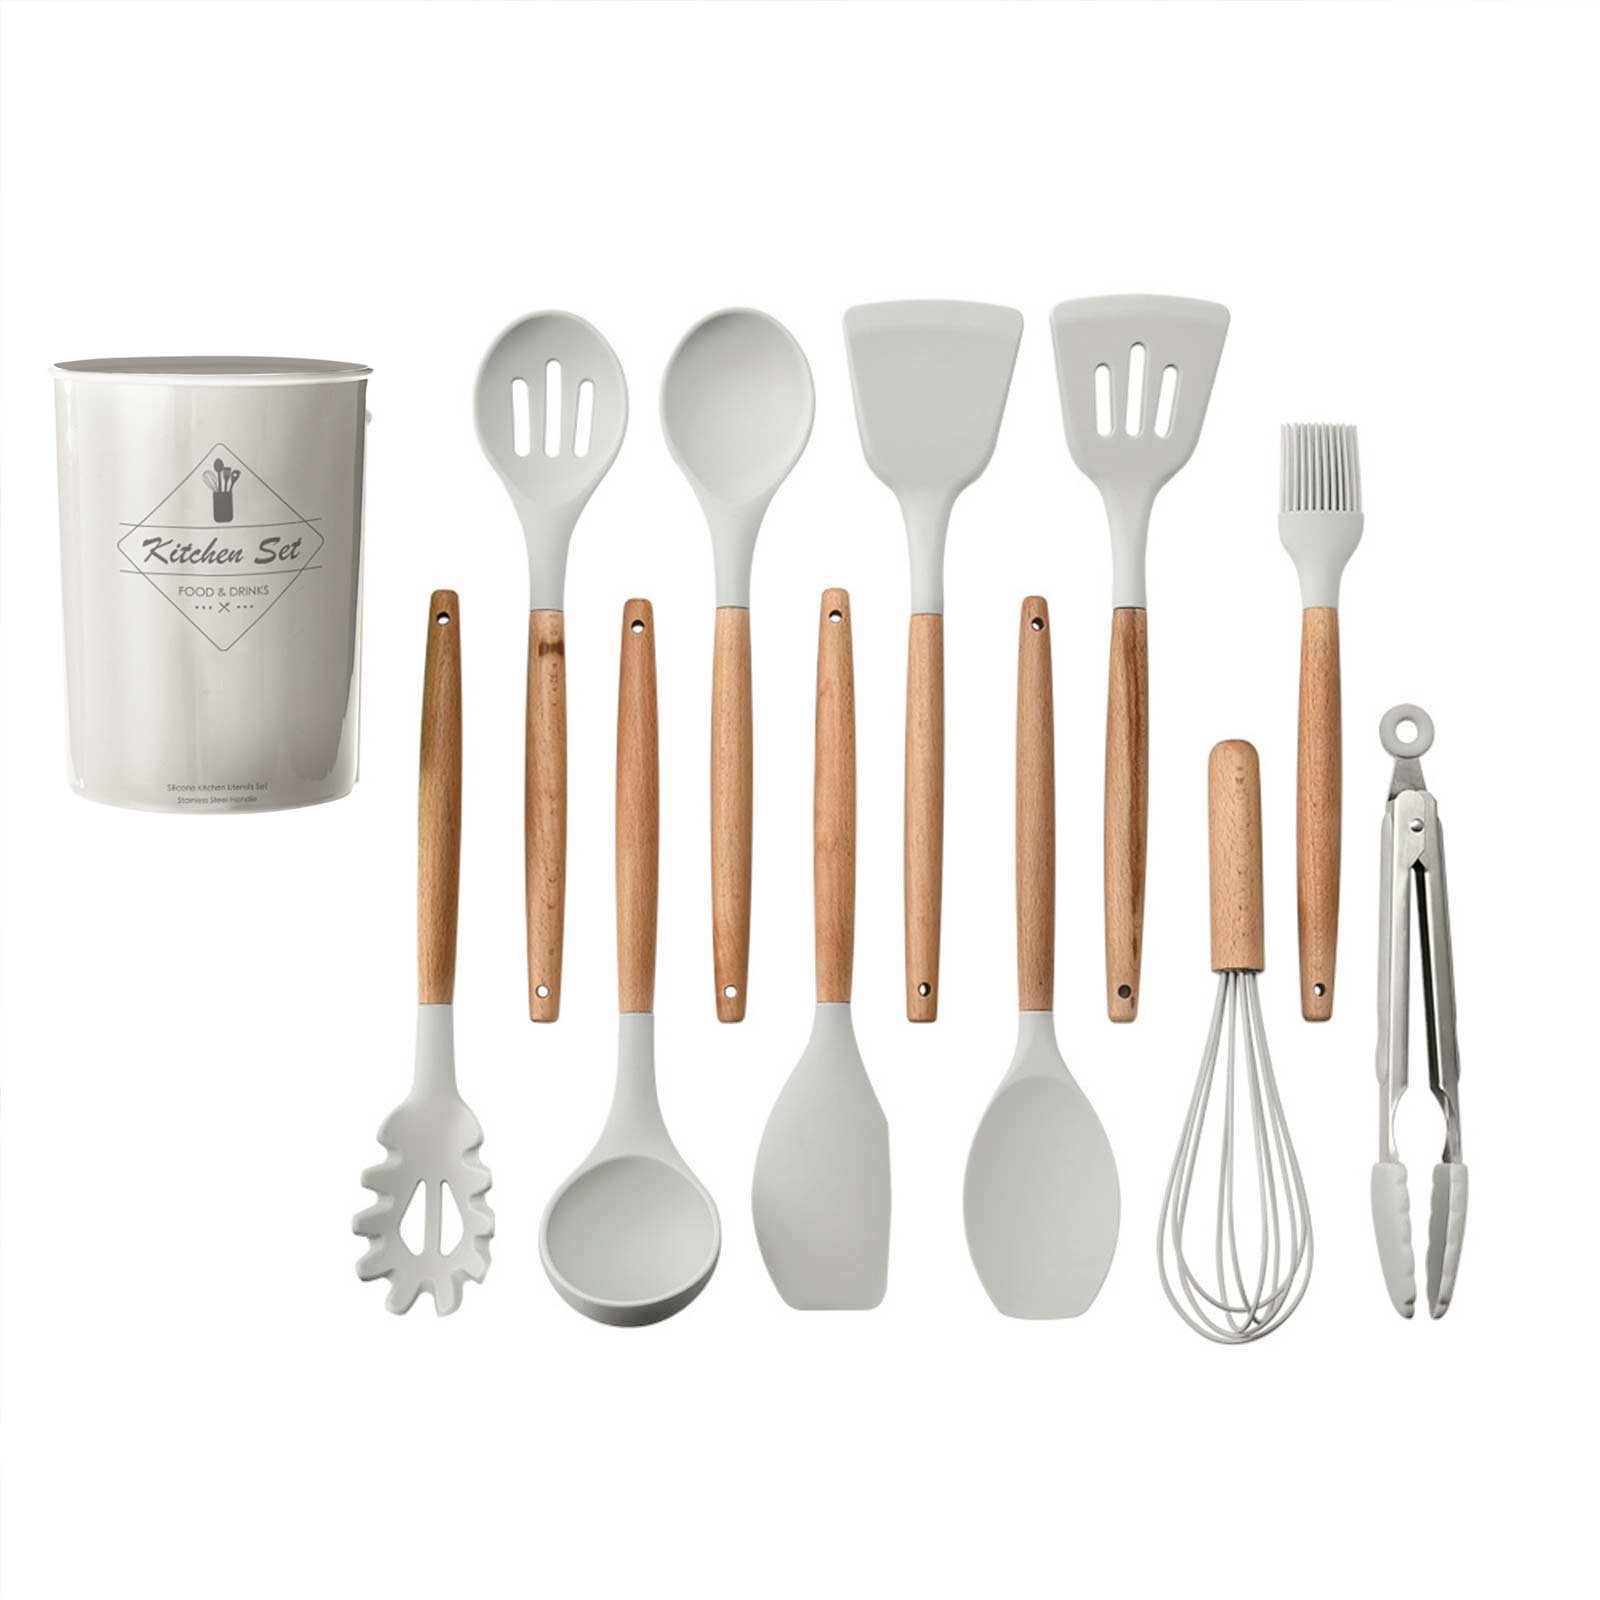 Doolland 11 pcs White Silicone Kitchen Utensils Set Heat Resistant Silicone  Cooking Utensils Beech Wooden Handles Non-Stick Silicone Cooking Set  Holder, Spatula, Tongs, Whisk, Brush, Spoon, BPA-Free 